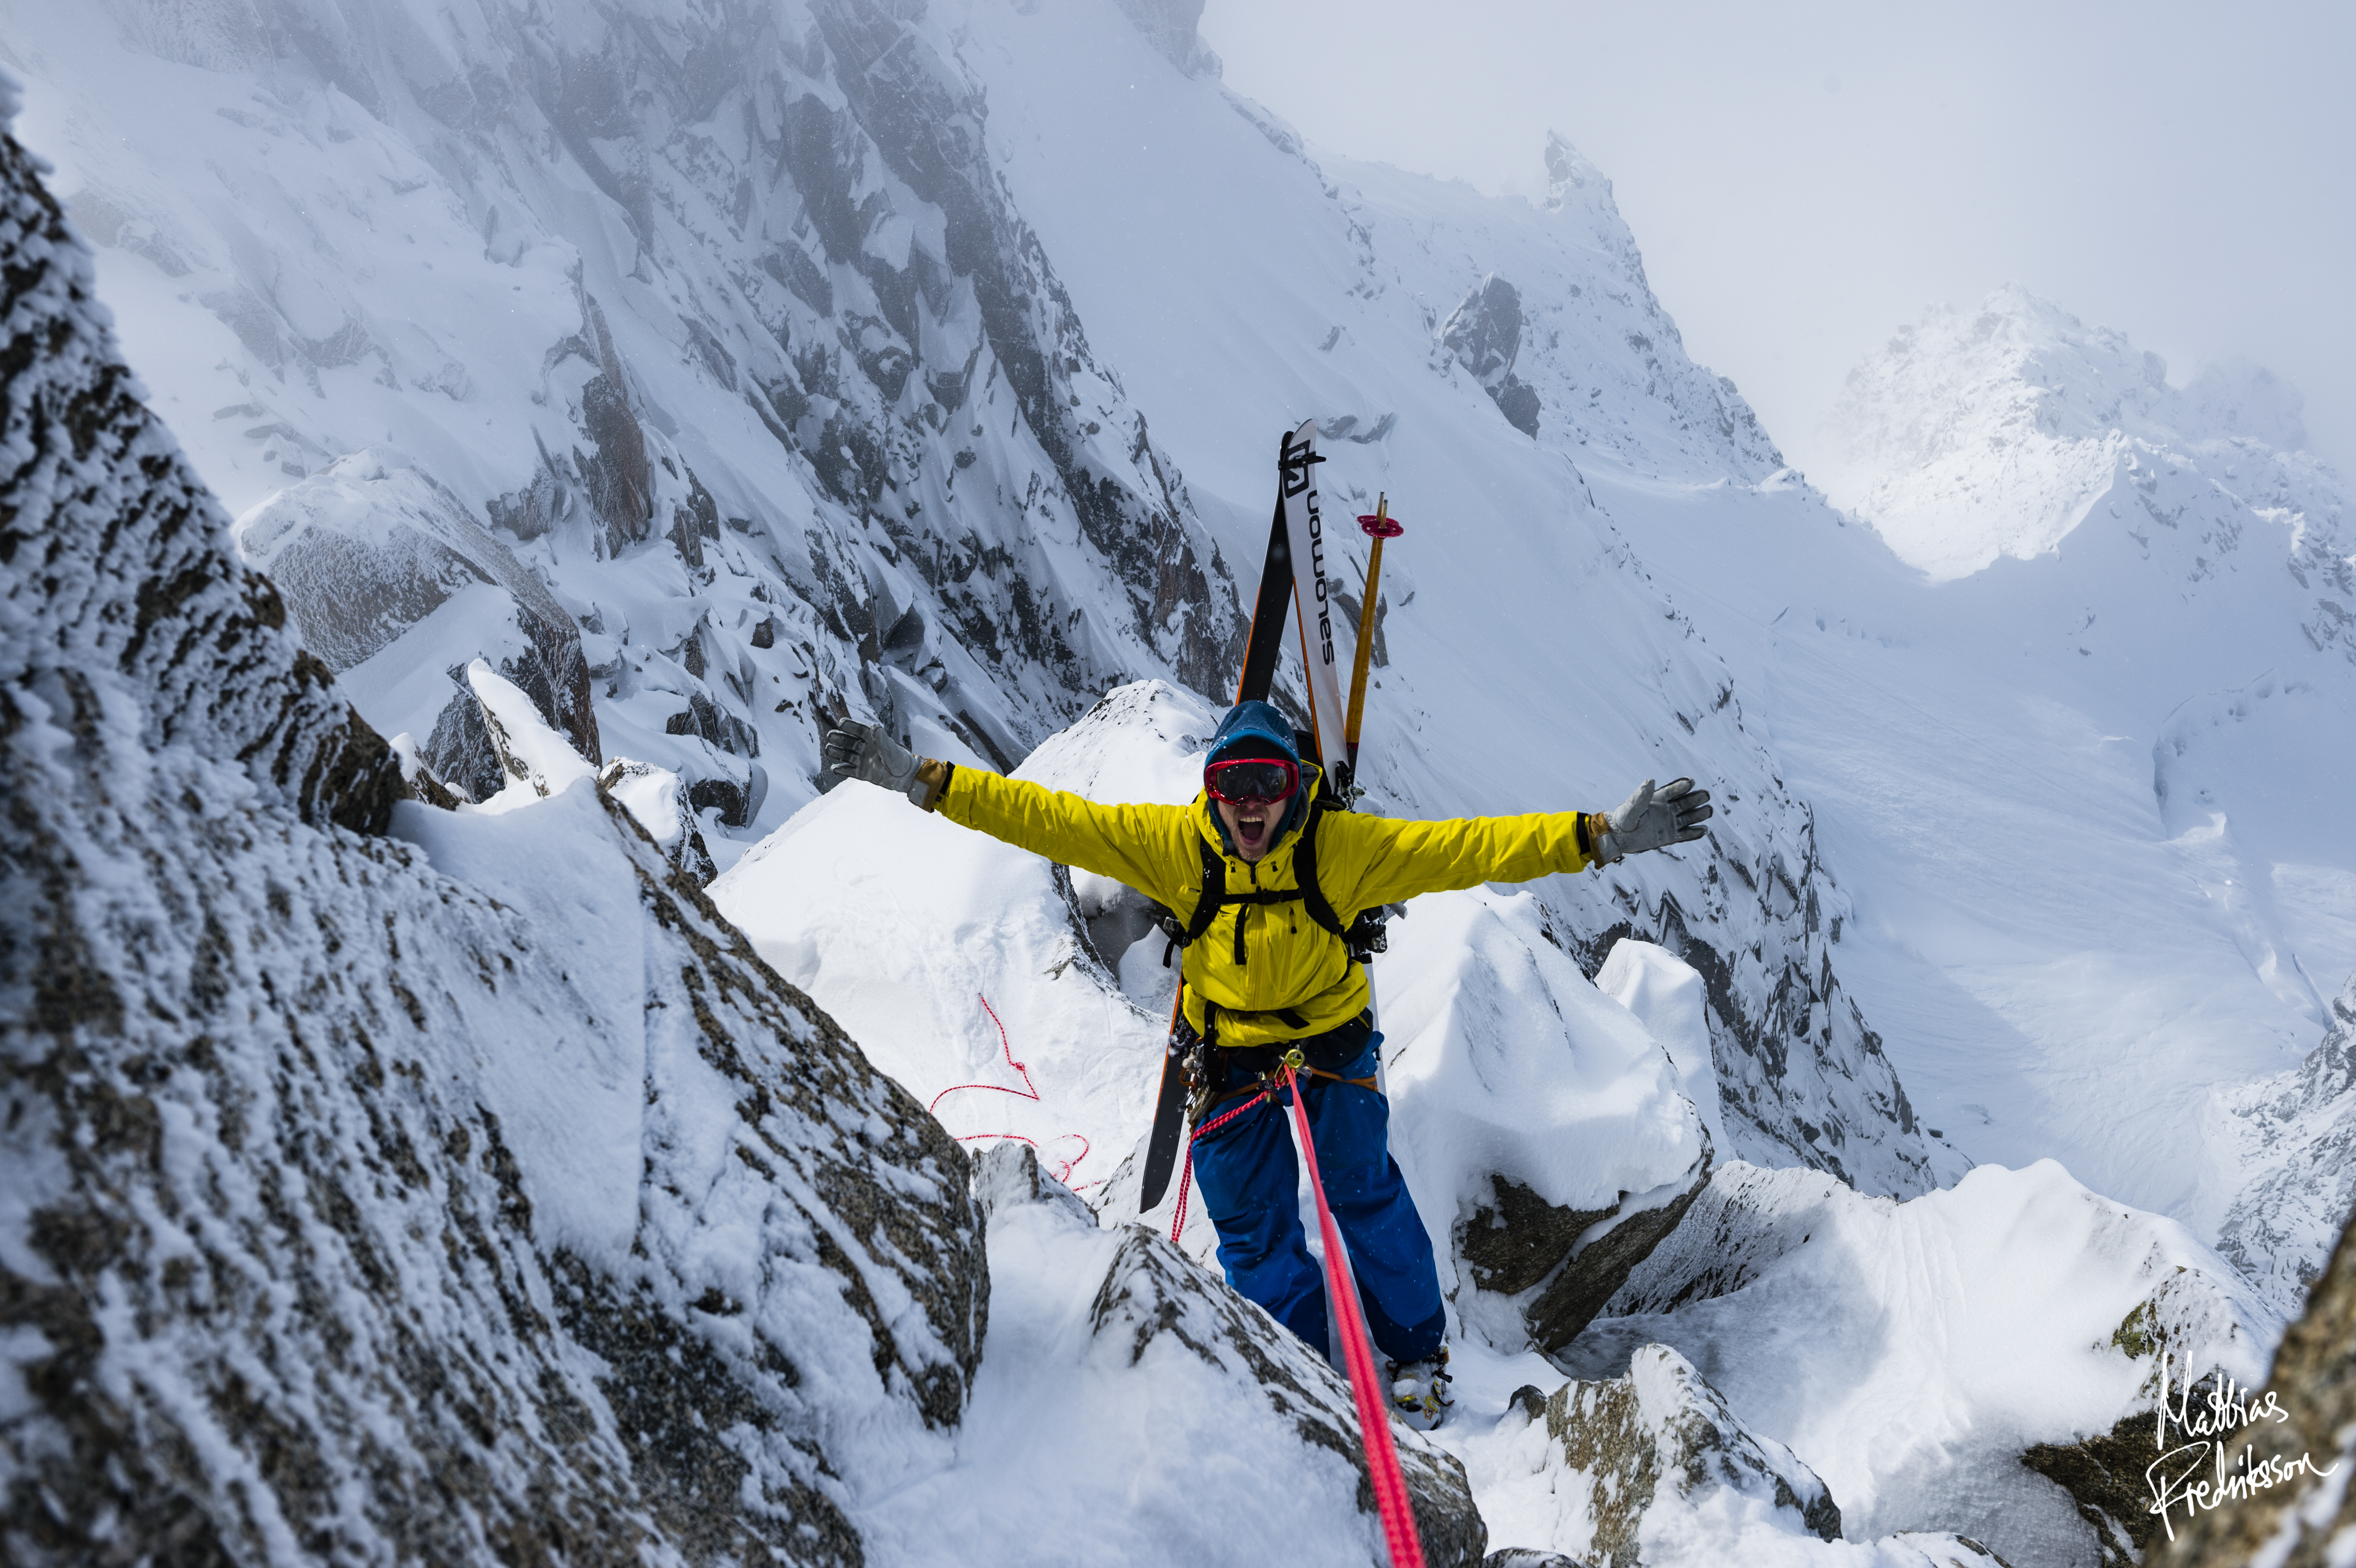 Andreas Fransson rappelling in Chamonix, France.